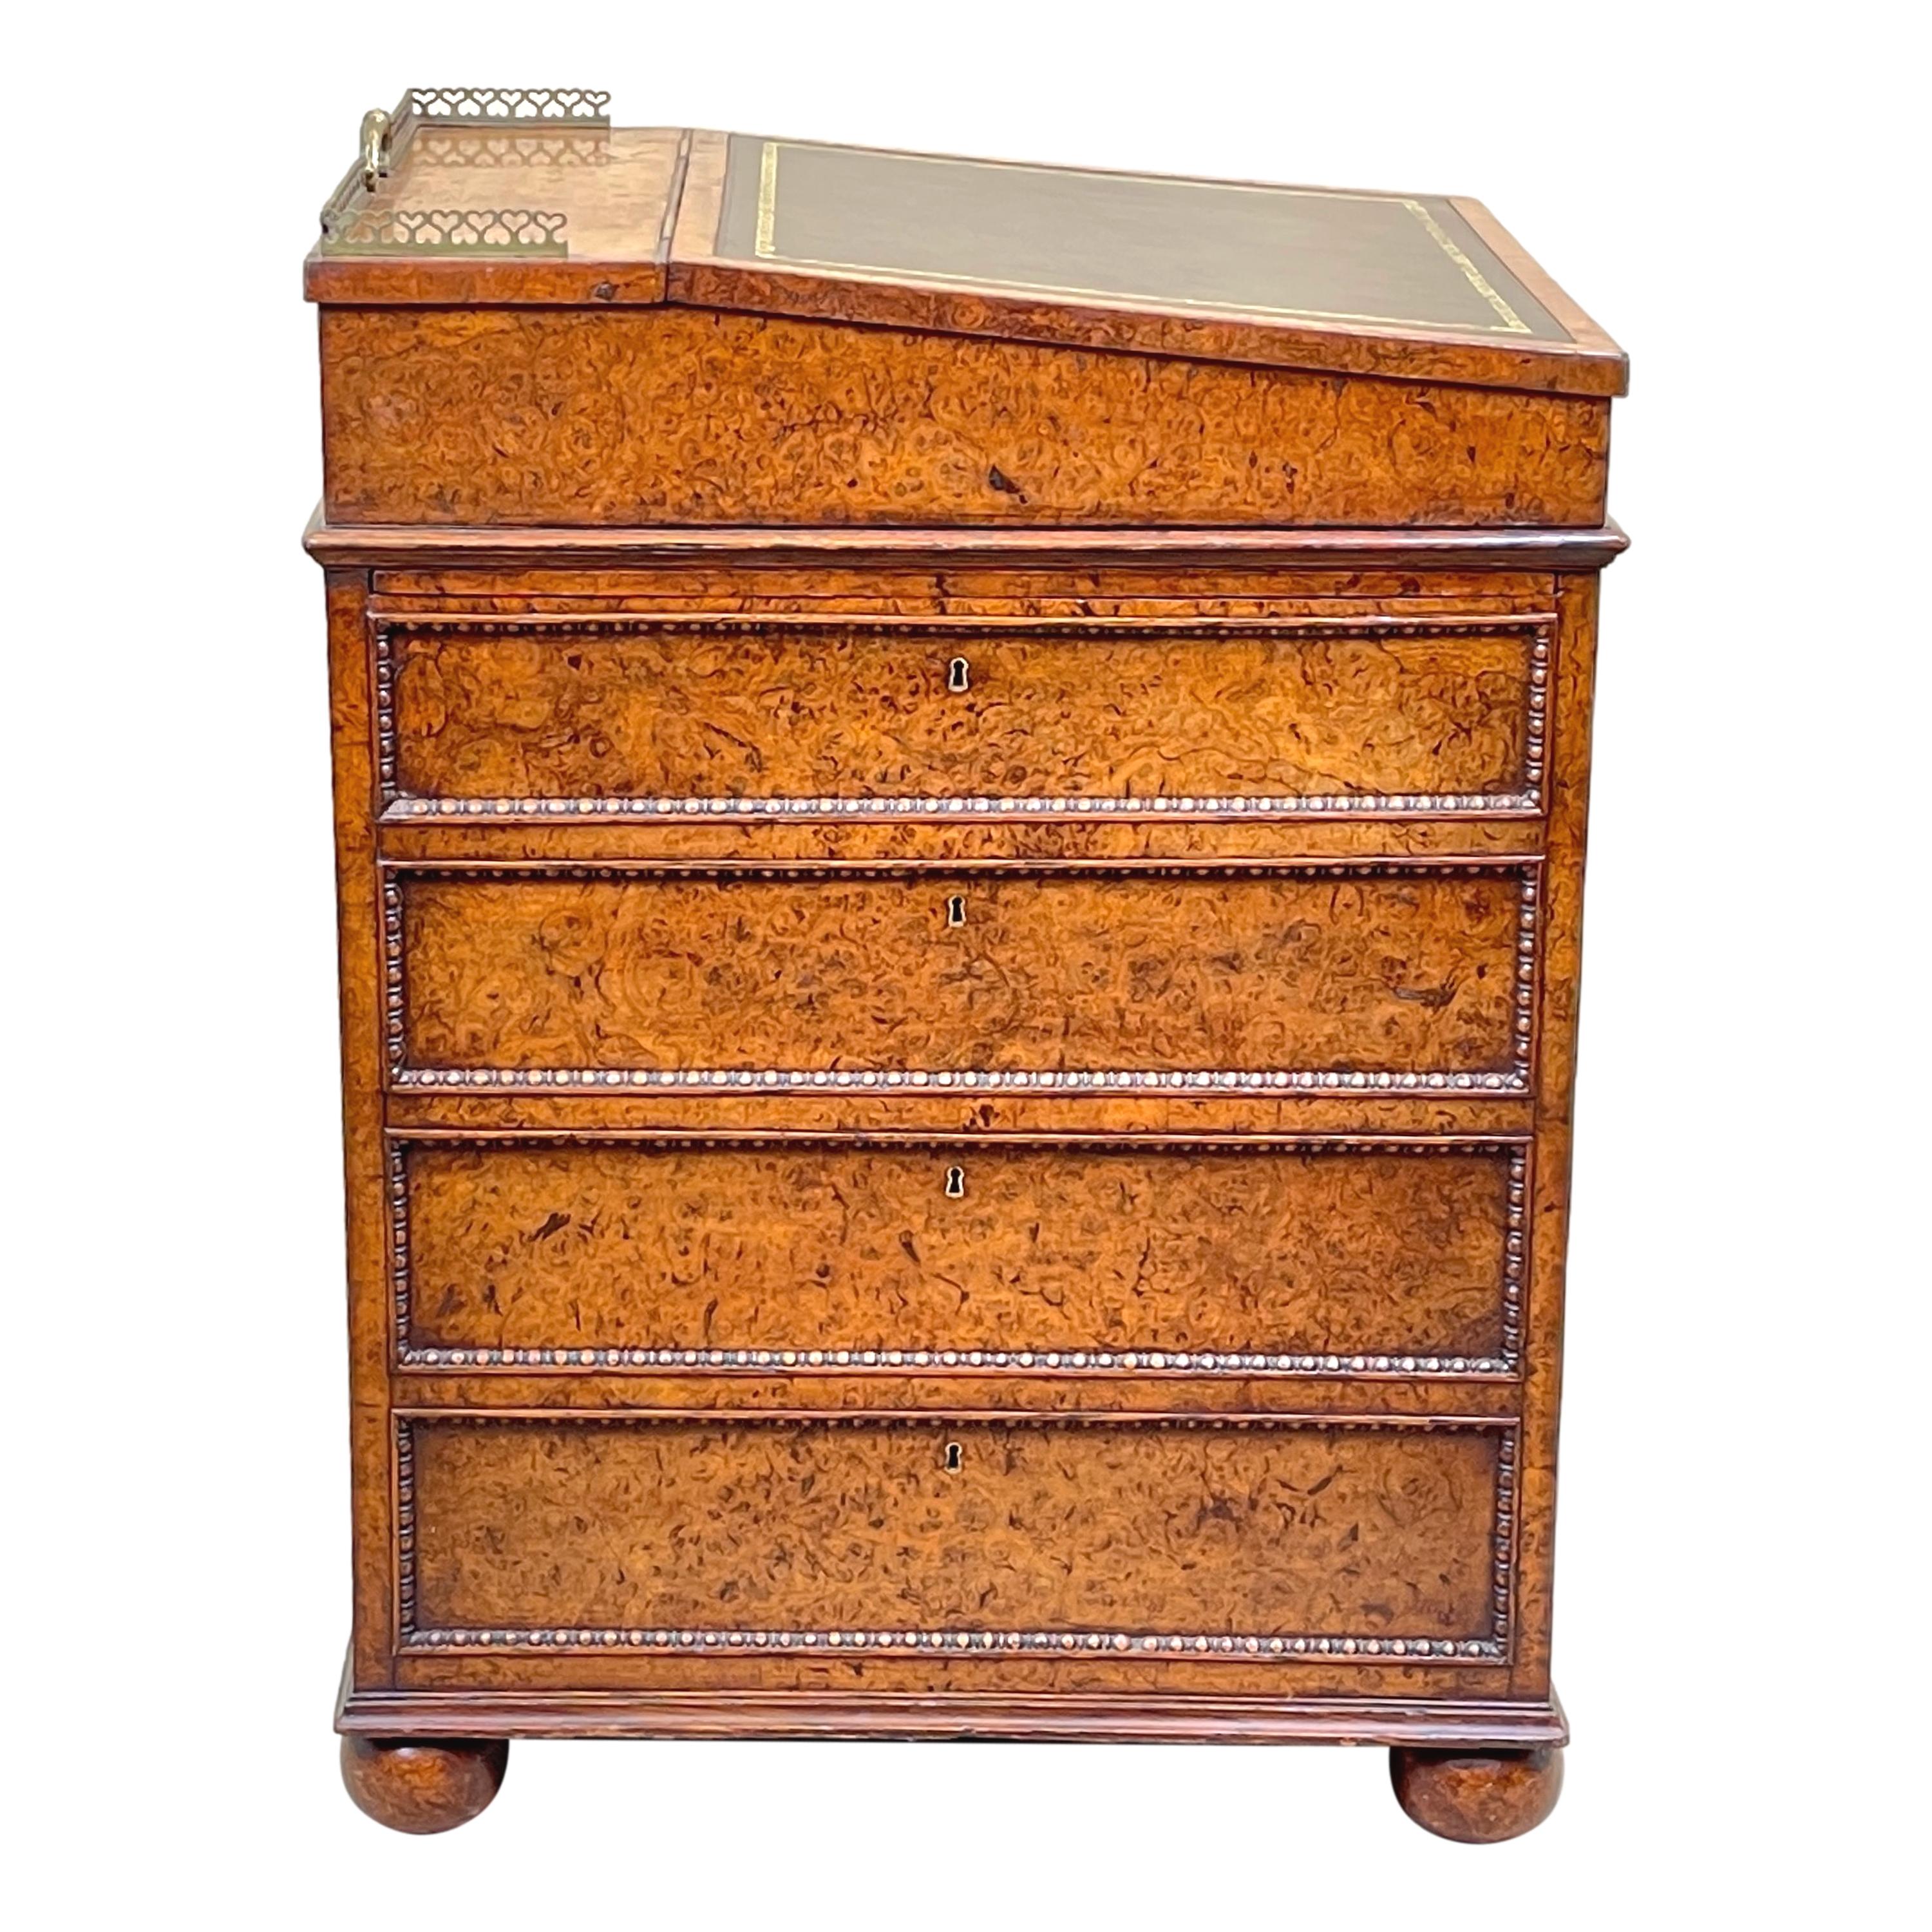 An Exceptional Quality And Extremely Rare Early 18th Century Regency Period Burr Elm Davenport Having Hinged Swivel Top With Inset Leather, Retaining Elegant Original Ormolu Gallery With Pierced Handle, Over Rare Mechanical Slide And Four Ash Lined